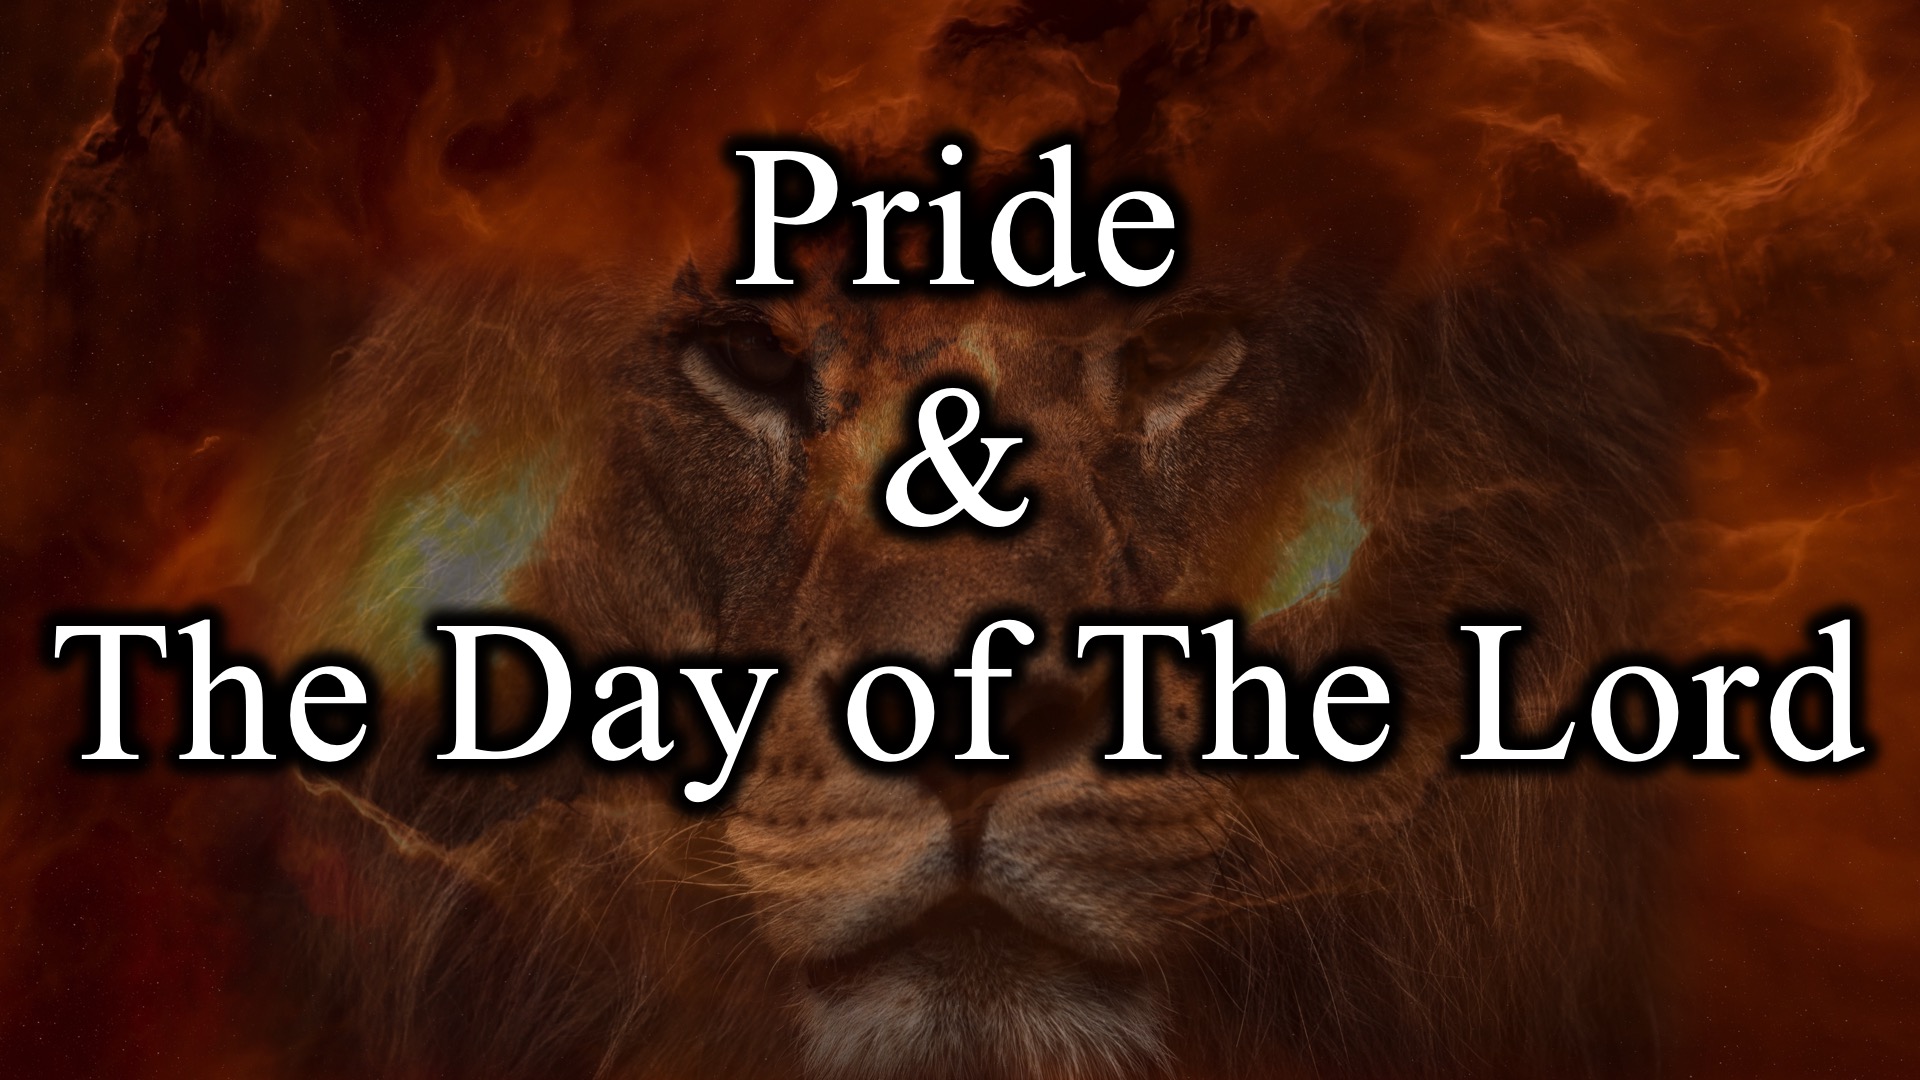 Pride & The Day Of The Lord